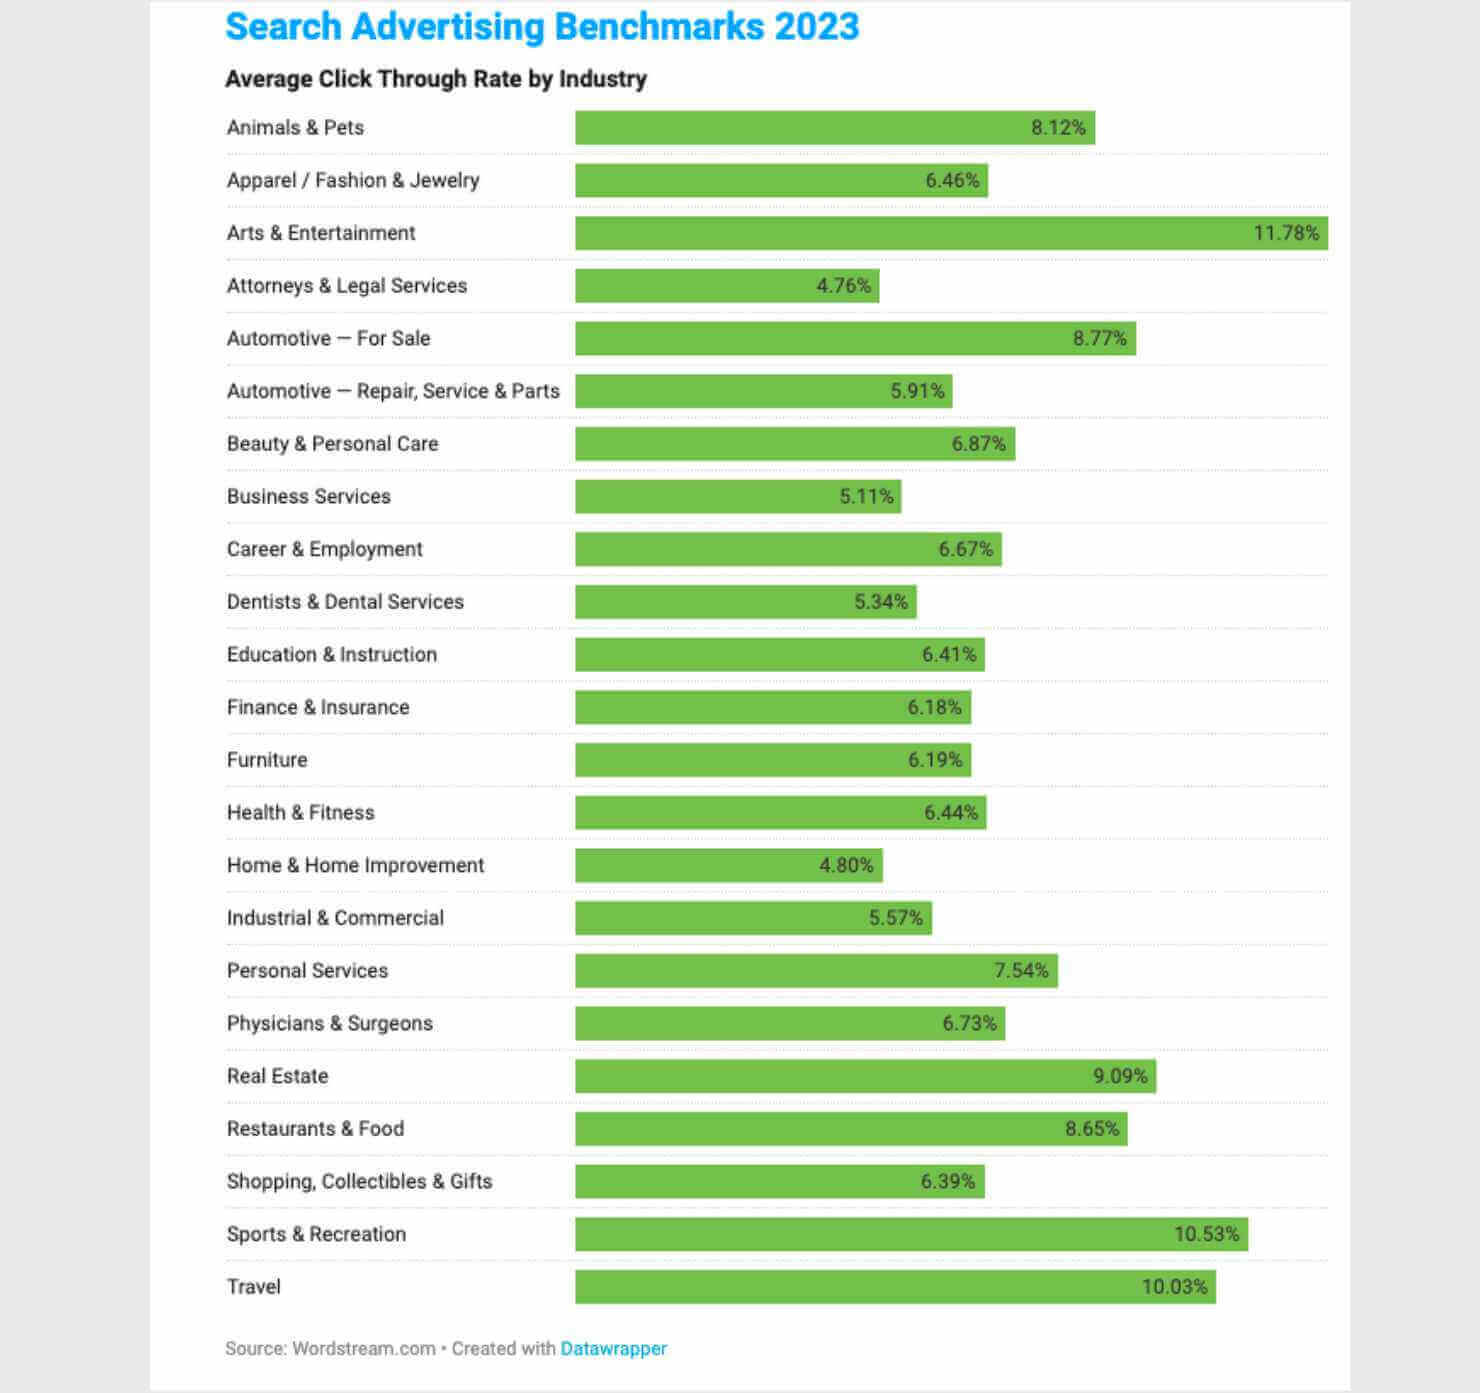 A bar graph from WordStream.com titled Search Advertising Benchmarks 2023: Average Click Rate by Industry. Here is the data: Animals & Pets: 11.78%, Apparel/Fashion & Jewelry: 8.12%, Arts & Entertainment: 6.46%, Attorneys & Legal Services: 4.76%, Automotive – For Sale: 8.77%, Automotive – Repair, Service & Parts: 5.91%, Beauty & Personal Care: 6.87%, Business Services: 5.11%, Career & Employment: 6.67%, Dentists & Dental Services: 5.34%, Education & Instruction: 6.41%, Finance & Insurance: 6.18%, Furniture: 6.19%, Health & Fitness: 6.44%, Home & Home Improvement: 4.80%, Industrial & Commercial: 5.57%, Personal Services: 7.54%, Physicians & Surgeons: 6.73%, Real Estate: 9.09%, Restaurants & Food: 8.65%, Shopping, Collectibles & Gifts: 6.39%, Sports & Recreation: 10.53%, Travel: 10.03%.